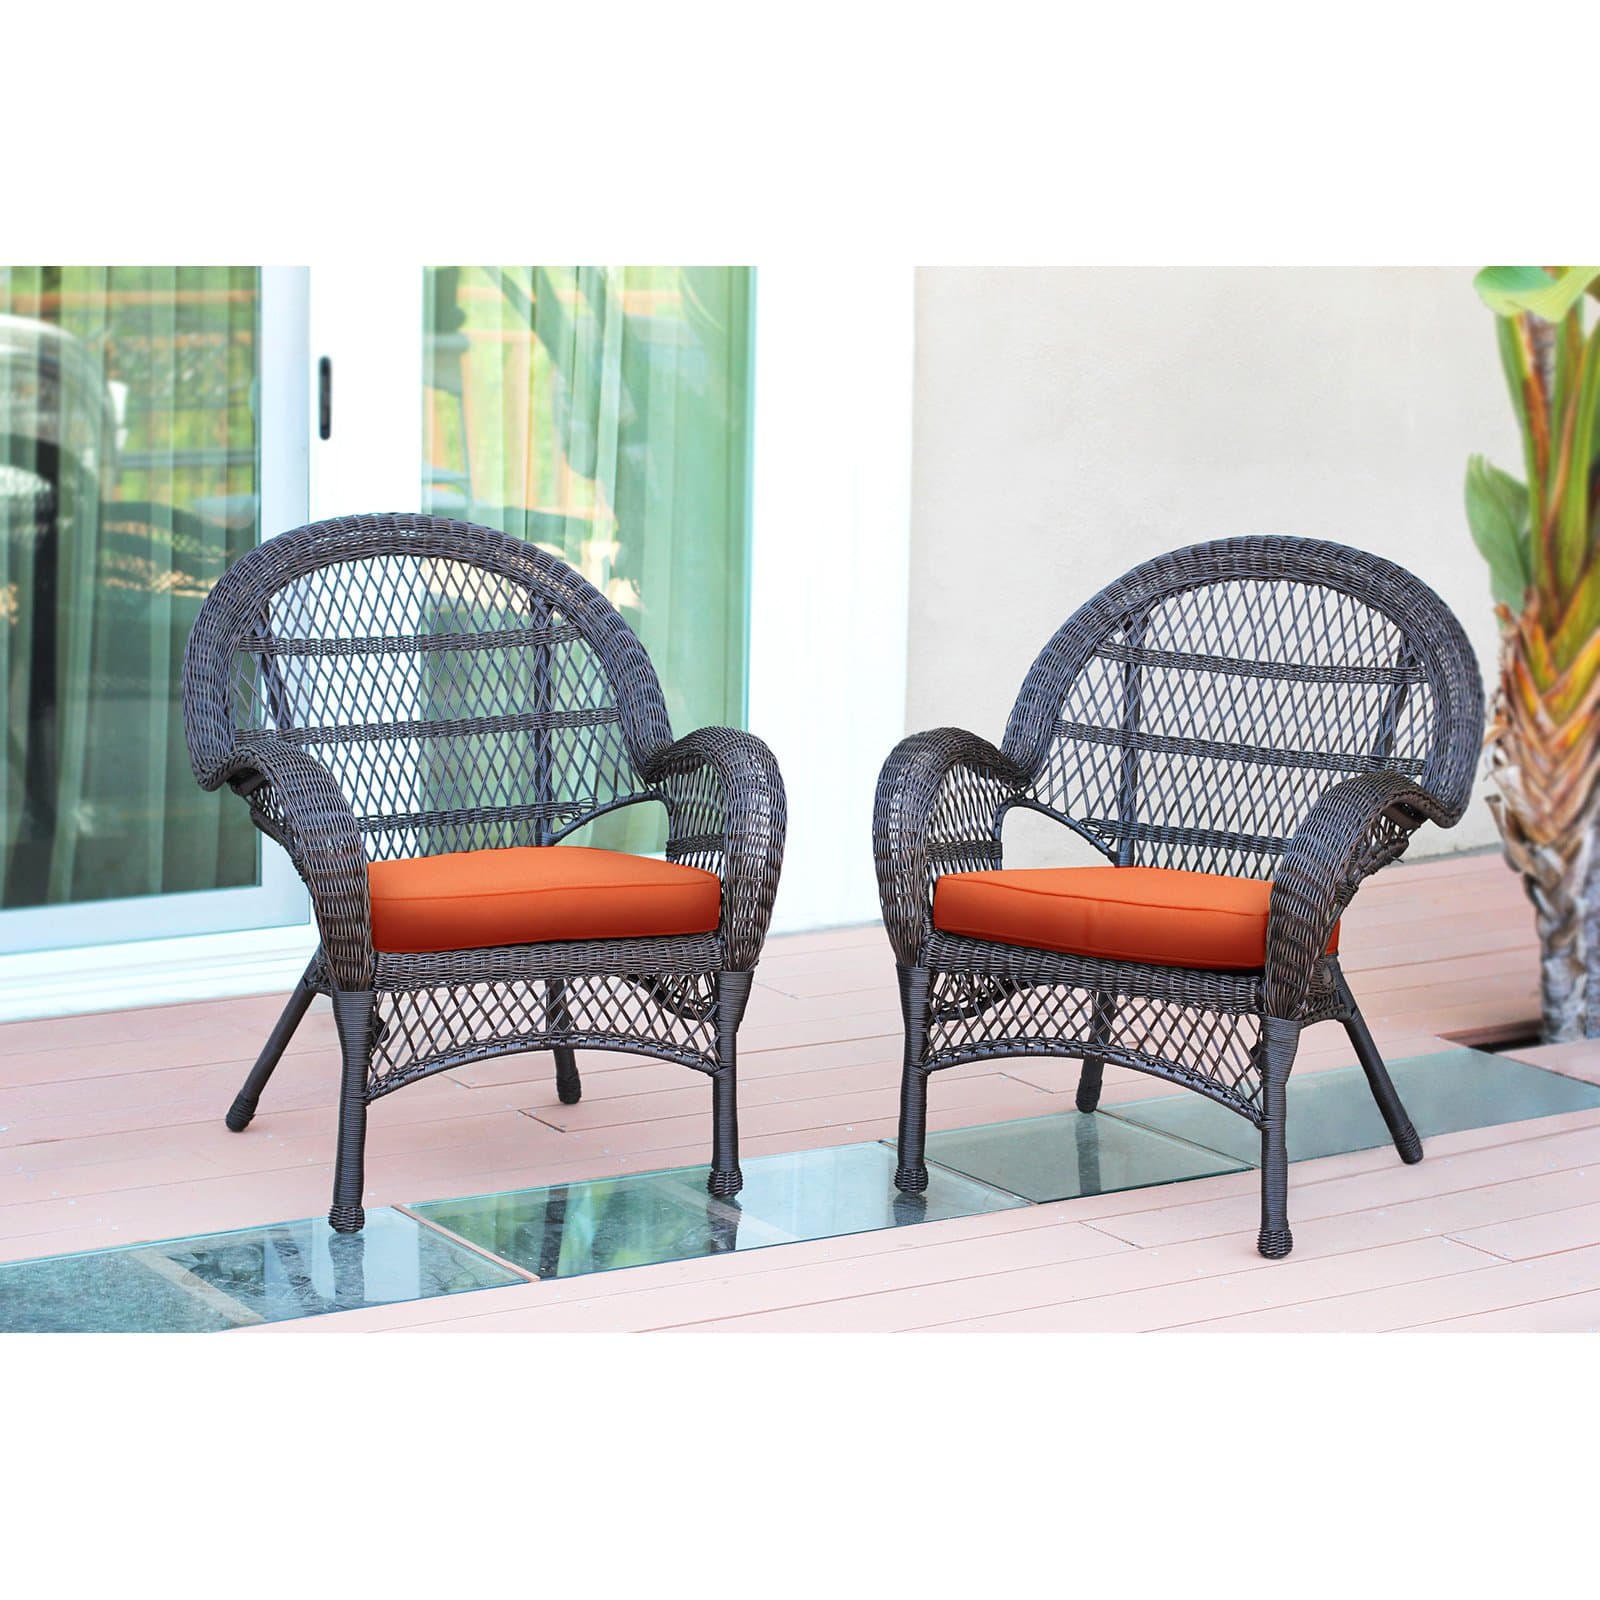 Jeco Wicker Chair in Espresso with Brown Cushion (Set of 4) - image 4 of 11